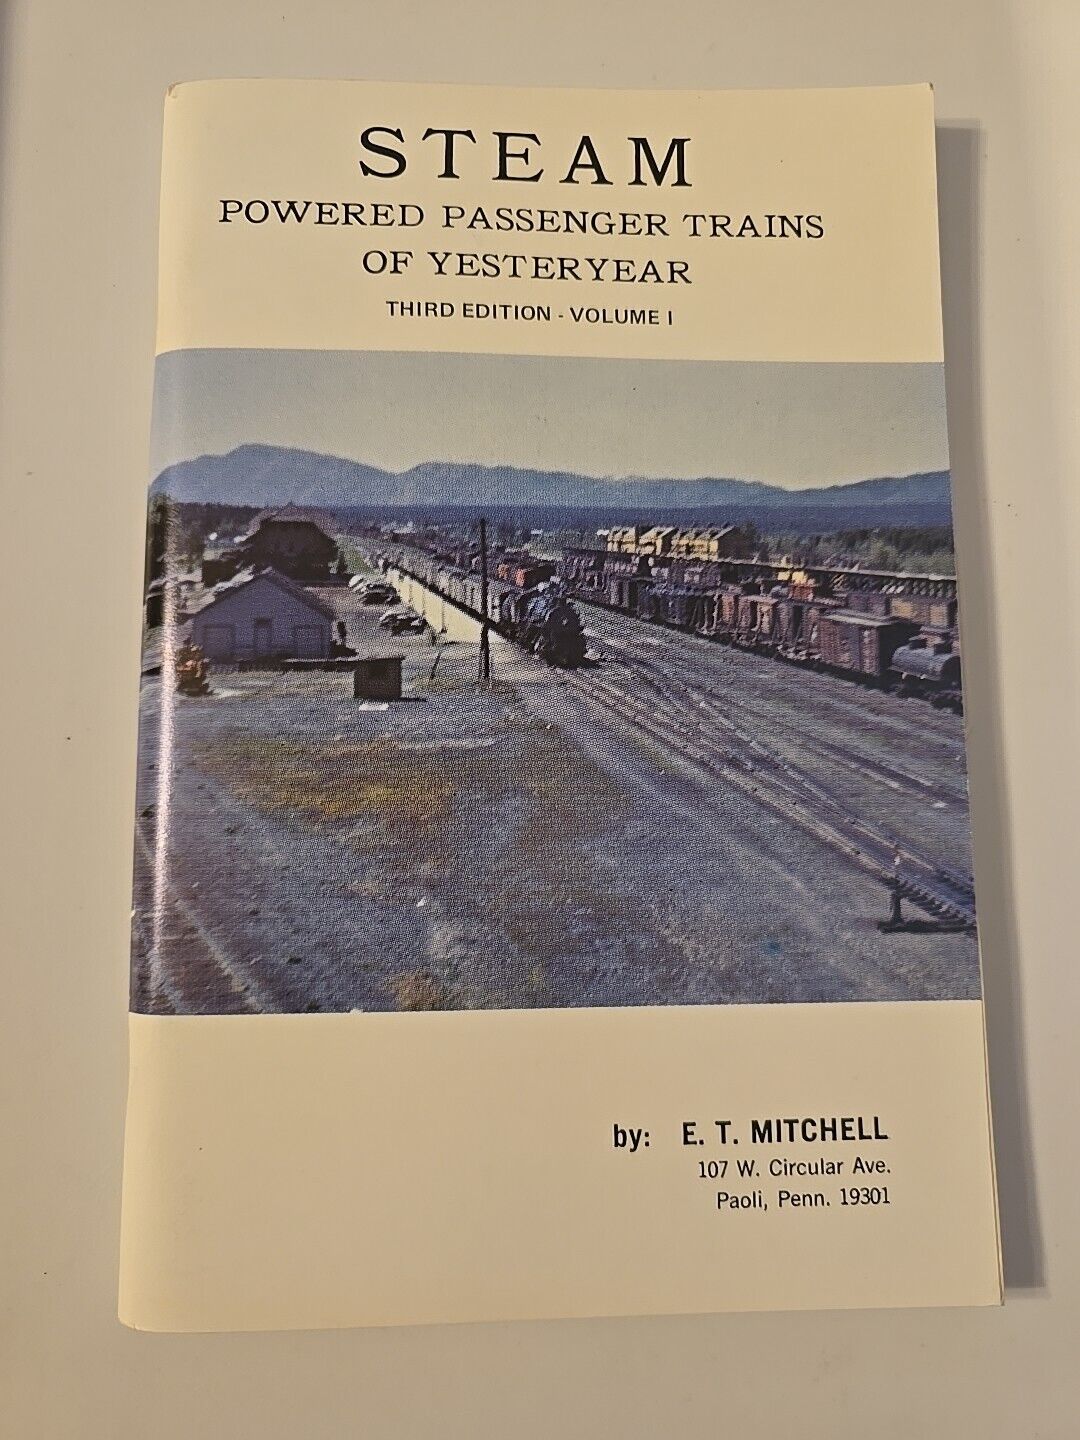 1971 Steam Powered Passenger Trains Of Yesteryear 3rd Ed  Vol 1 E. T. Mitchell